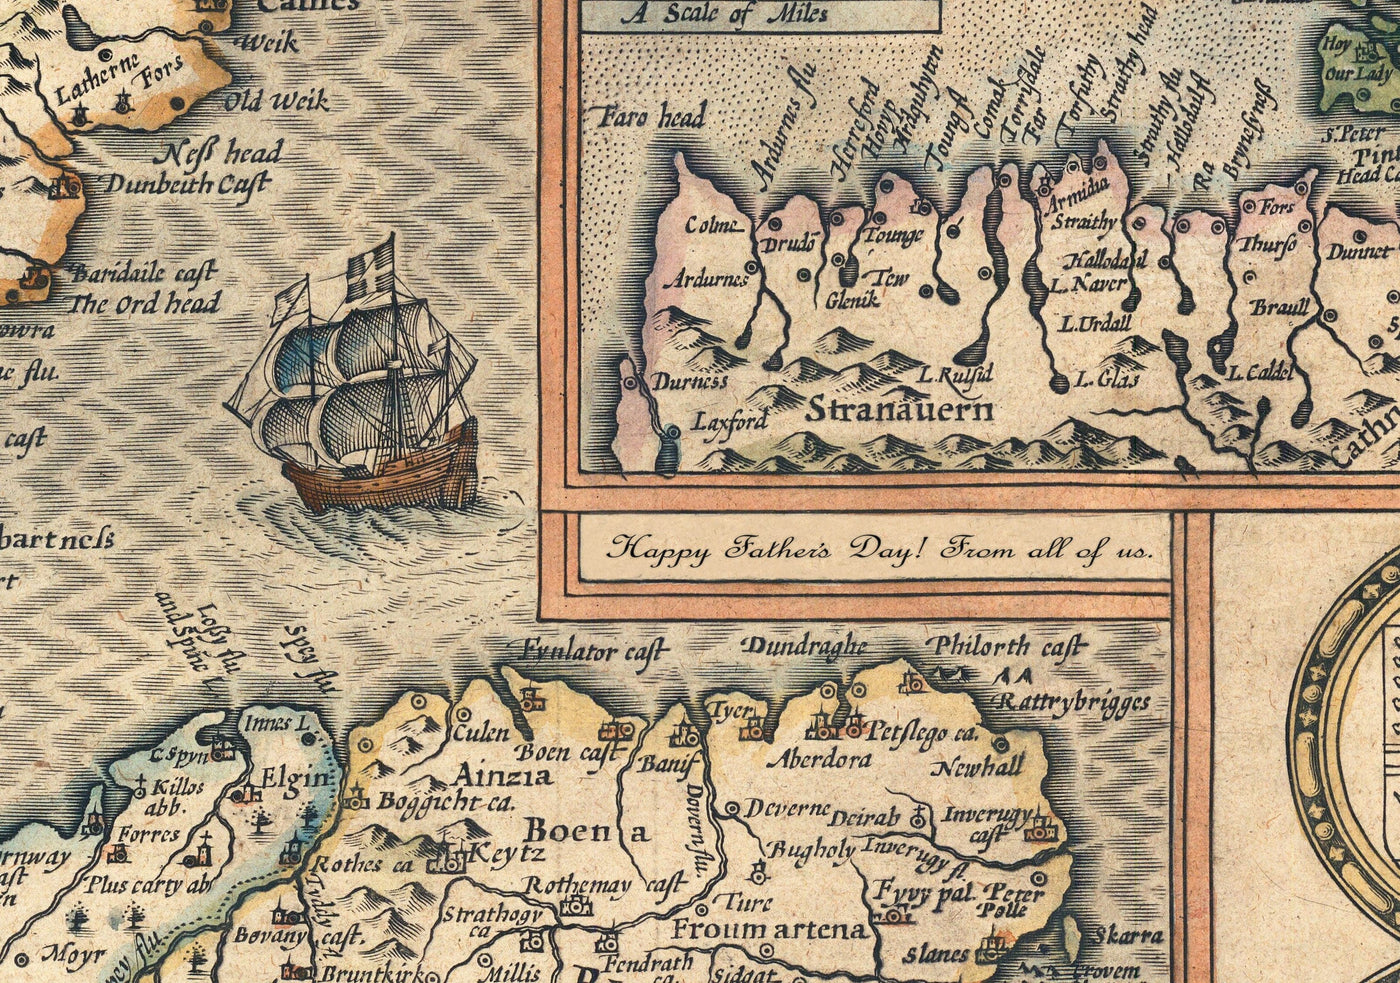 Old Map of Lincolnshire in 1611 by John Speed - Lincoln, Grimsby, Grantham, Boston